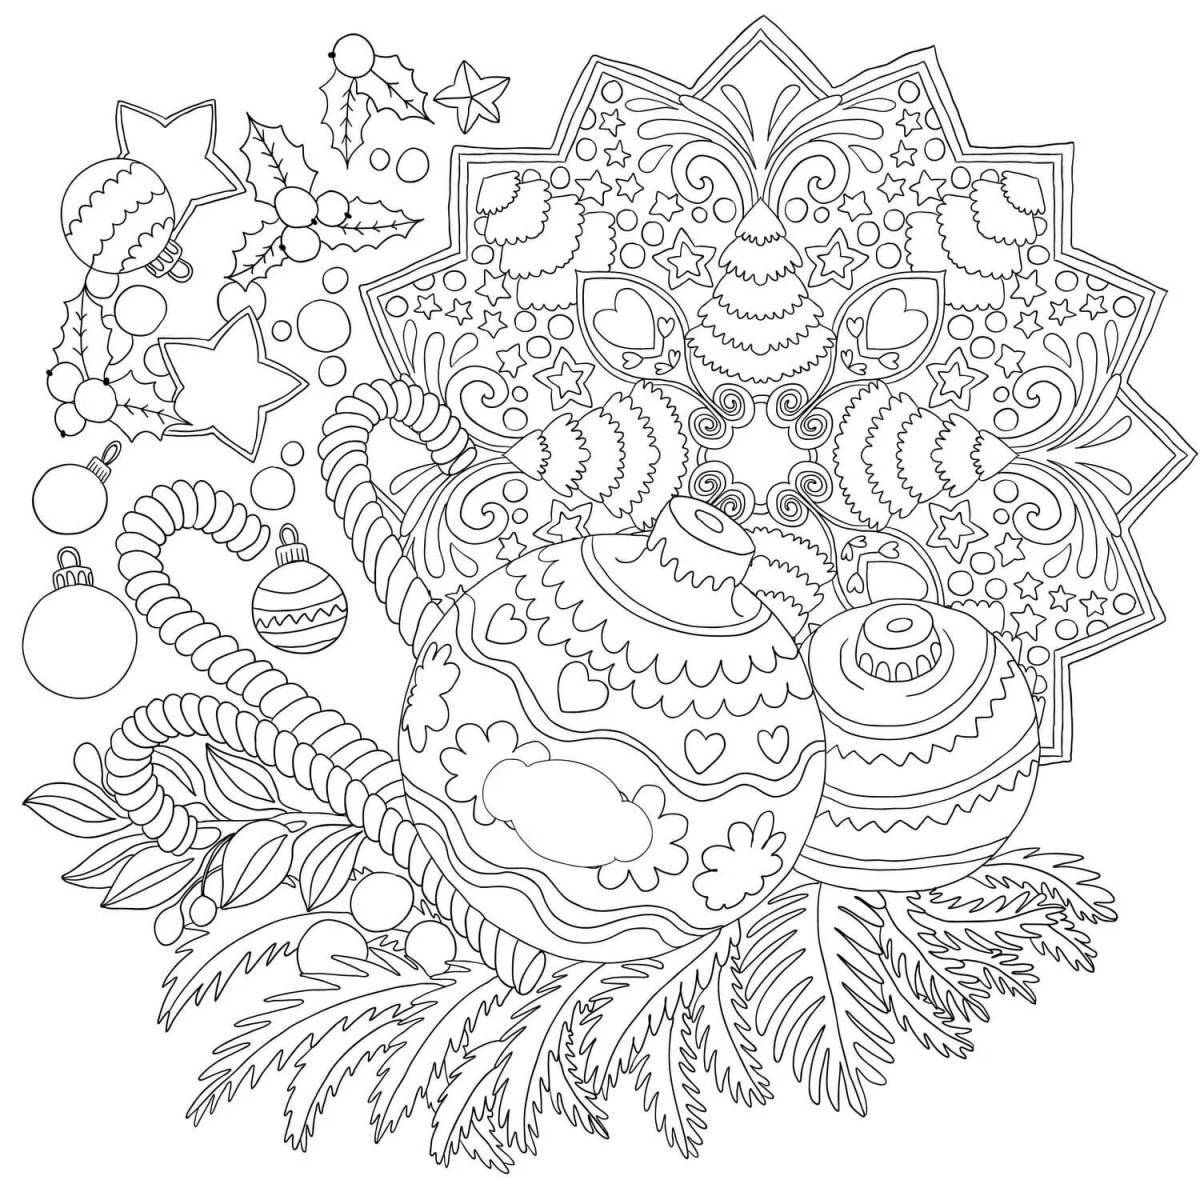 Glowing Christmas anti-stress coloring book